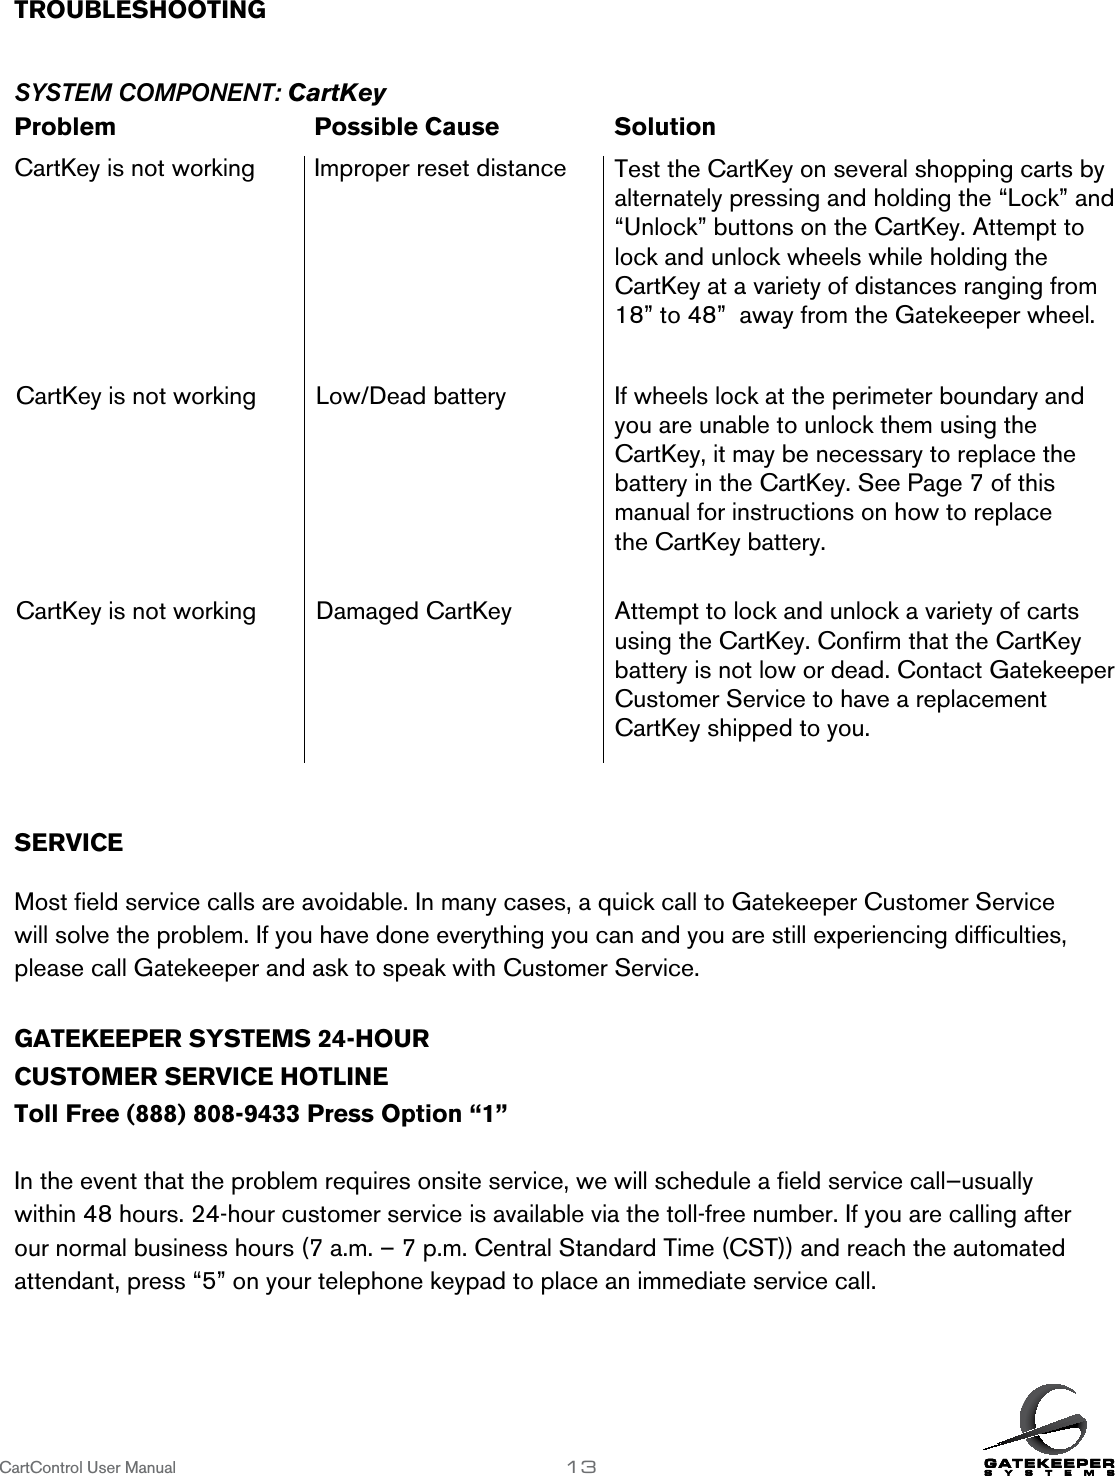 CartControl User Manual                   13TROUBLESHOOTING        SYSTEM COMPONENT: CartKeyProblem      Possible Cause    SolutionCartKey is not working  Improper reset distanceSERVICE           Most ﬁeld service calls are avoidable. In many cases, a quick call to Gatekeeper Customer Service will solve the problem. If you have done everything you can and you are still experiencing difﬁculties, please call Gatekeeper and ask to speak with Customer Service.GATEKEEPER SYSTEMS 24-HOURCUSTOMER SERVICE HOTLINEToll Free (888) 808-9433 Press Option “1”In the event that the problem requires onsite service, we will schedule a ﬁeld service call—usually within 48 hours. 24-hour customer service is available via the toll-free number. If you are calling after our normal business hours (7 a.m. – 7 p.m. Central Standard Time (CST)) and reach the automated attendant, press “5” on your telephone keypad to place an immediate service call.Test the CartKey on several shopping carts by alternately pressing and holding the “Lock” and “Unlock” buttons on the CartKey. Attempt to lock and unlock wheels while holding the  CartKey at a variety of distances ranging from 18” to 48”  away from the Gatekeeper wheel.CartKey is not working Low/Dead battery If wheels lock at the perimeter boundary and you are unable to unlock them using the  CartKey, it may be necessary to replace the  battery in the CartKey. See Page 7 of this manual for instructions on how to replace  the CartKey battery. CartKey is not working Damaged CartKey Attempt to lock and unlock a variety of carts using the CartKey. Conﬁrm that the CartKey battery is not low or dead. Contact Gatekeeper Customer Service to have a replacement  CartKey shipped to you.